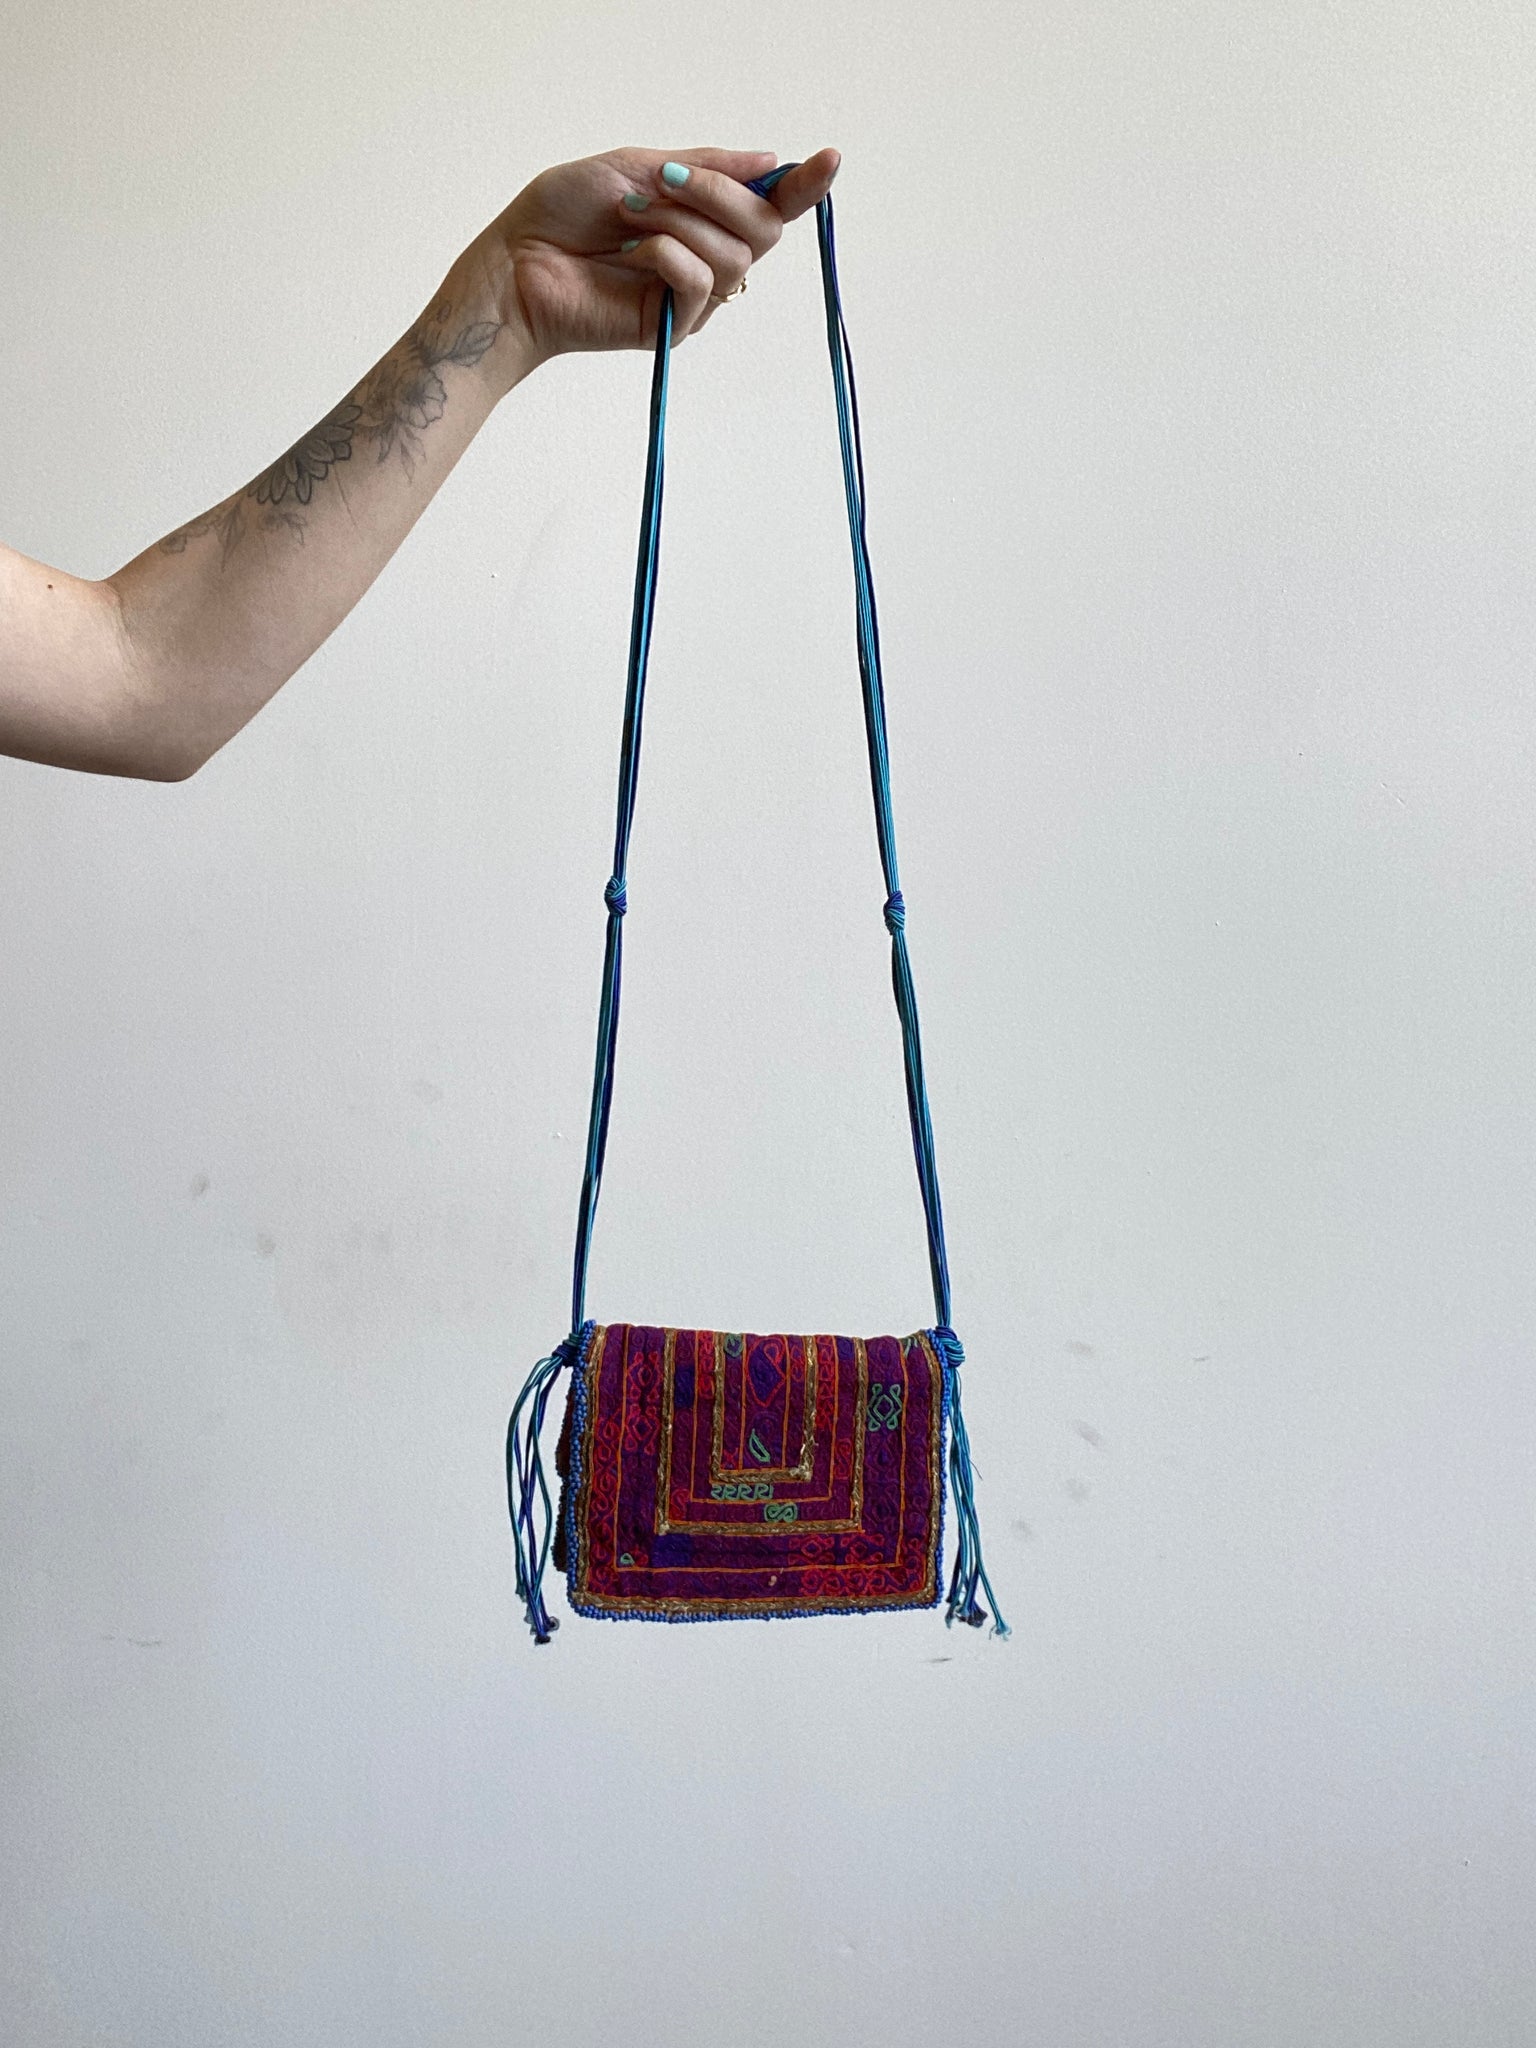 Small Vintage Embroidered Bag